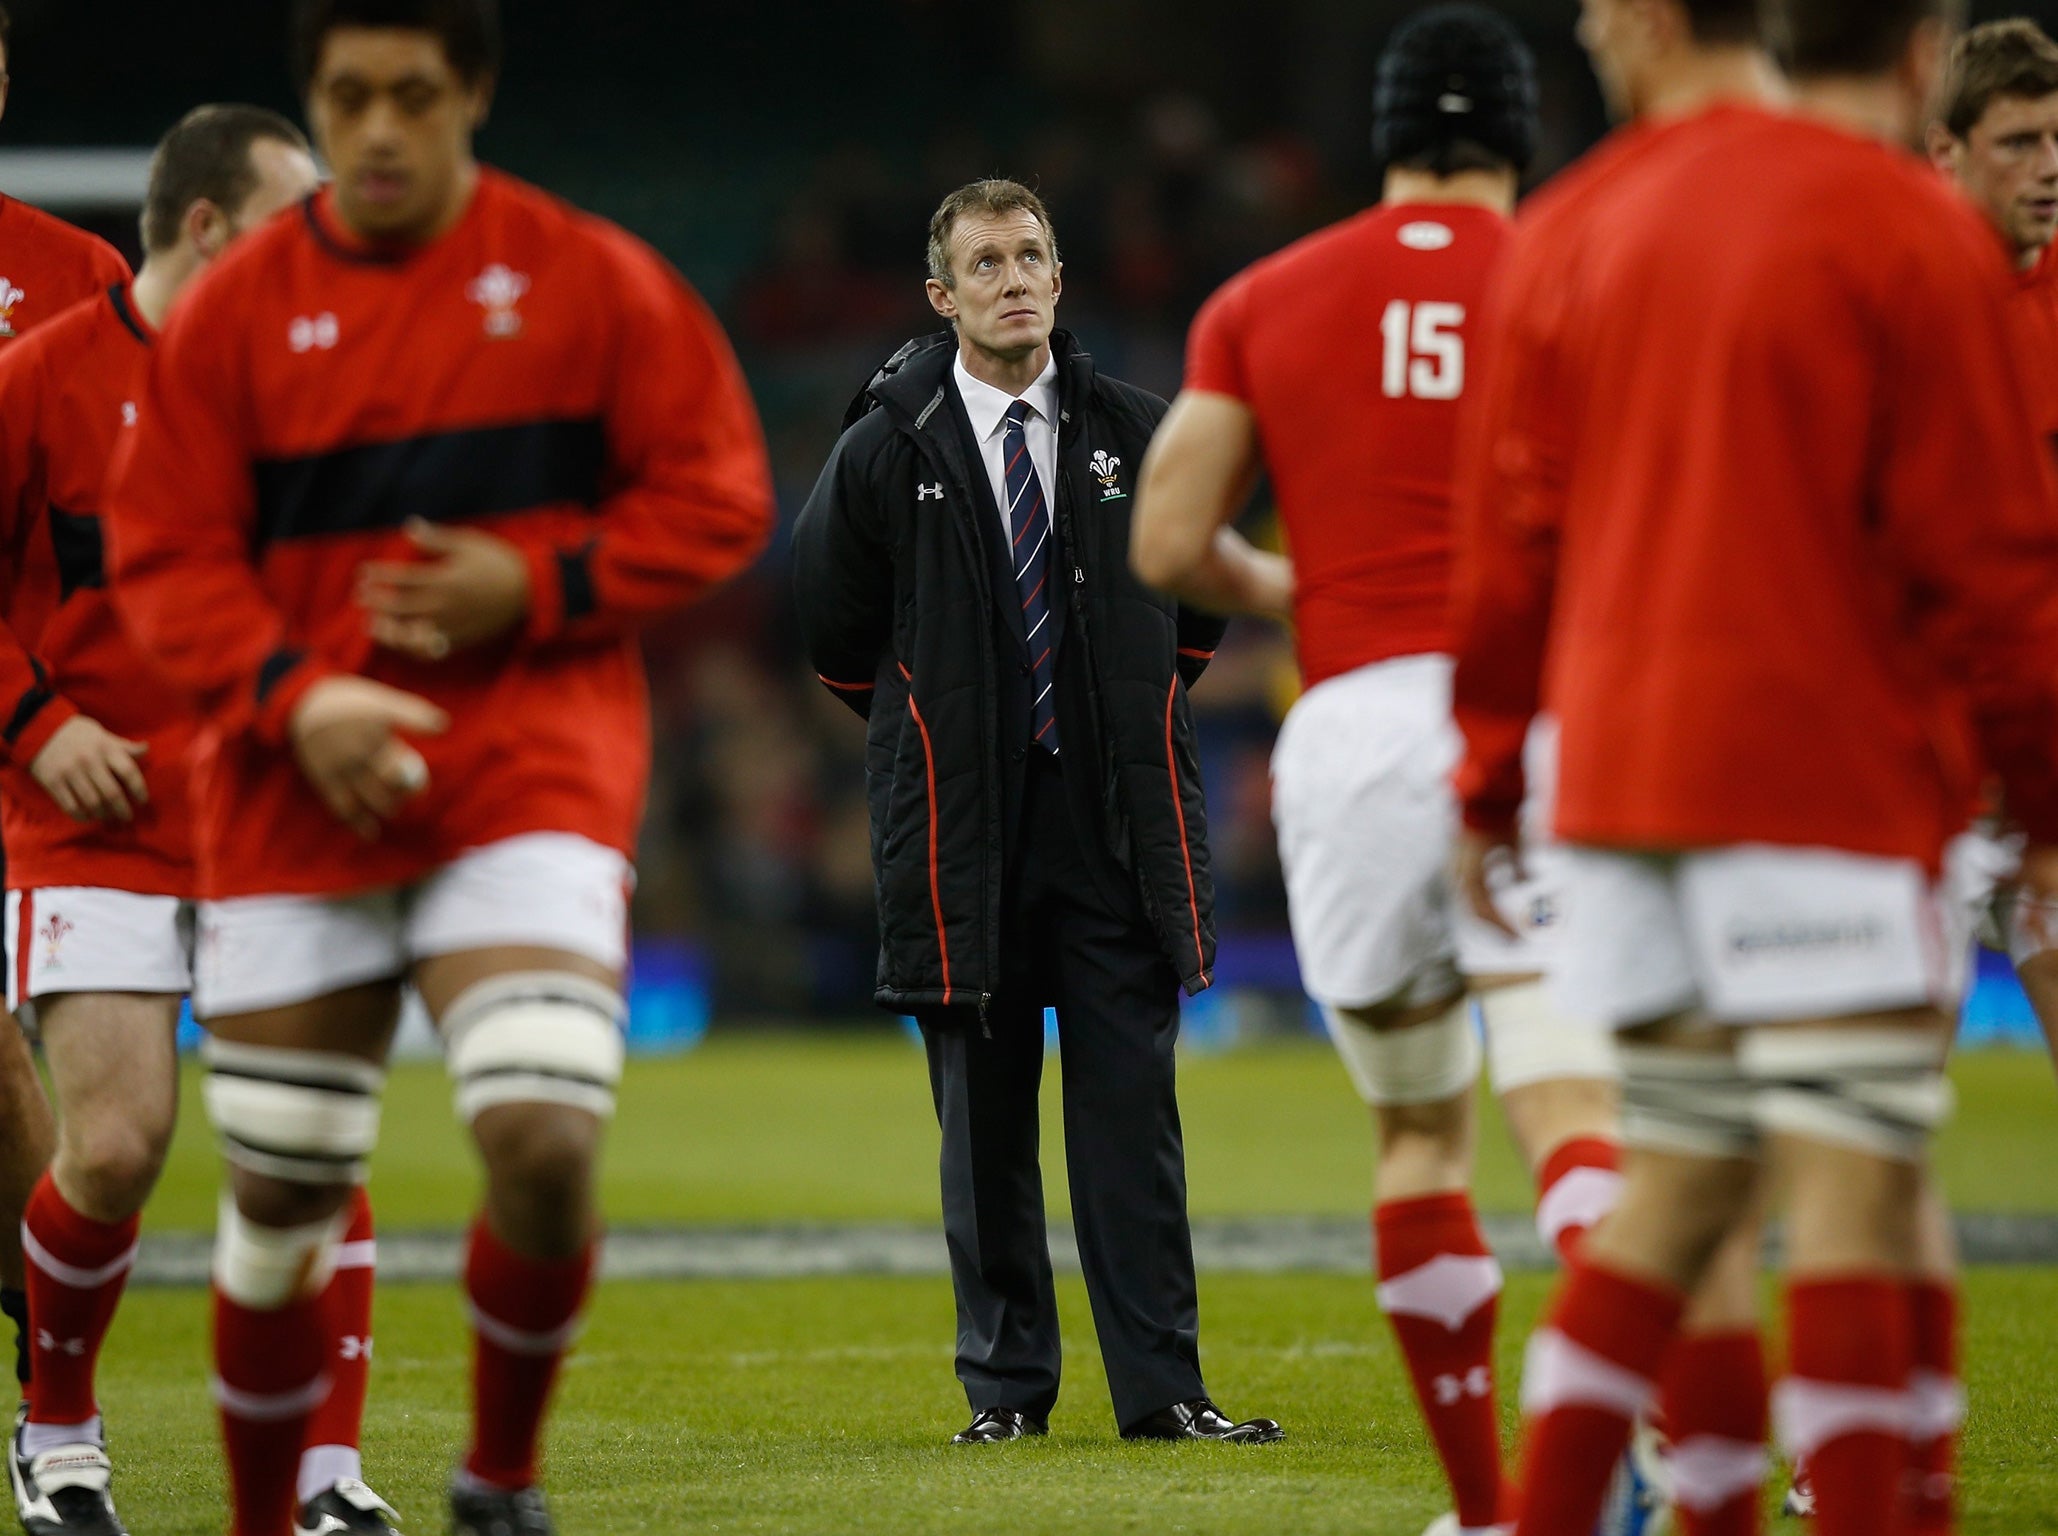 Heavens above: interim coach Rob Howley appears to offer up a prayer as Wales prepare for the All Blacks